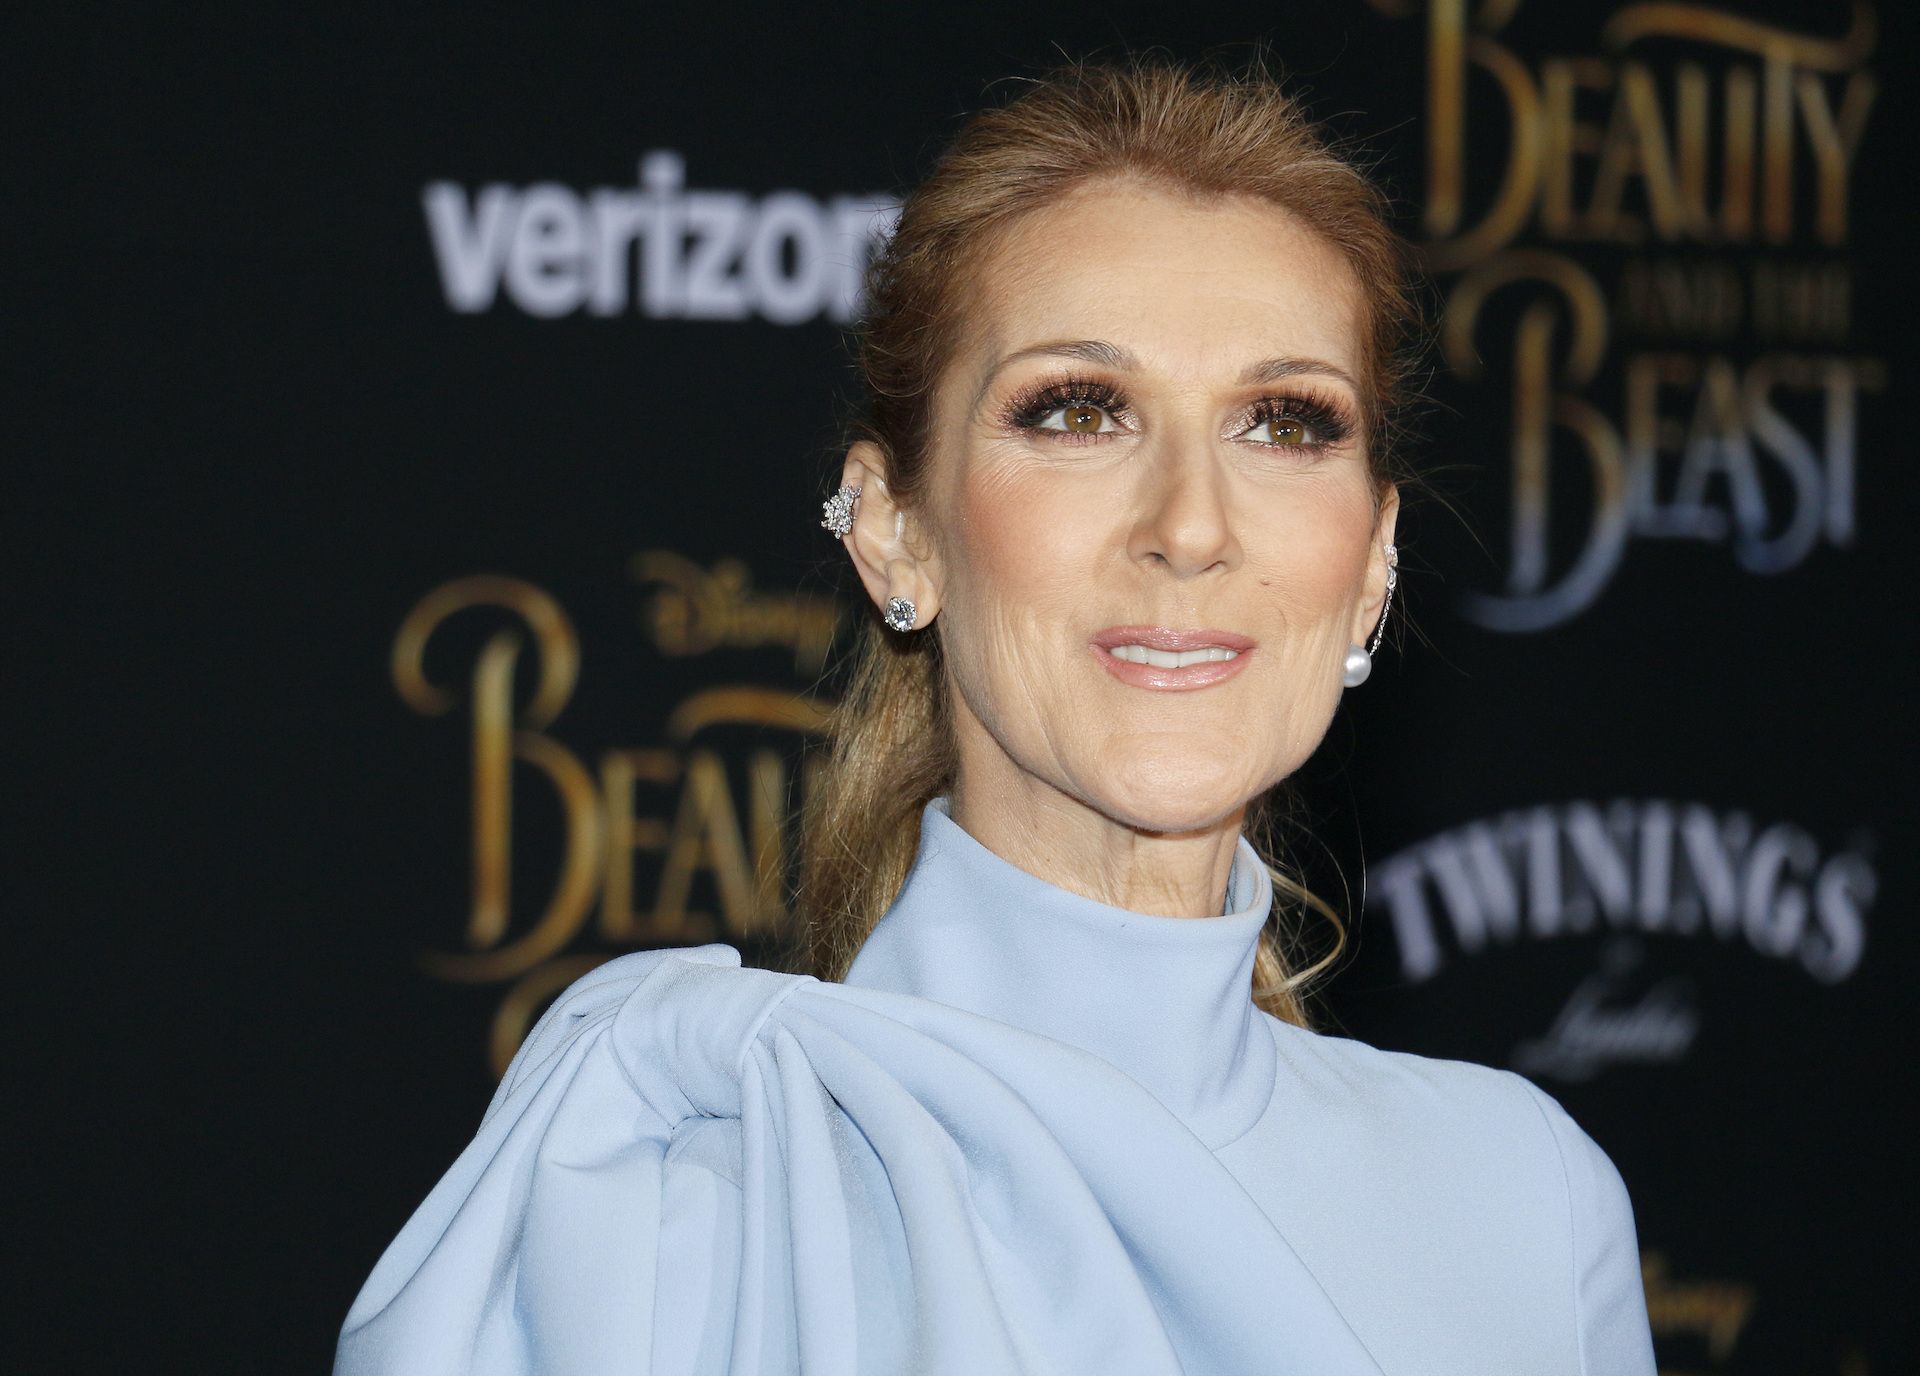 Celine Dion has announced that she will cancel upcoming dates for her 2023 tour after receiving a rare neurological diagnosis.